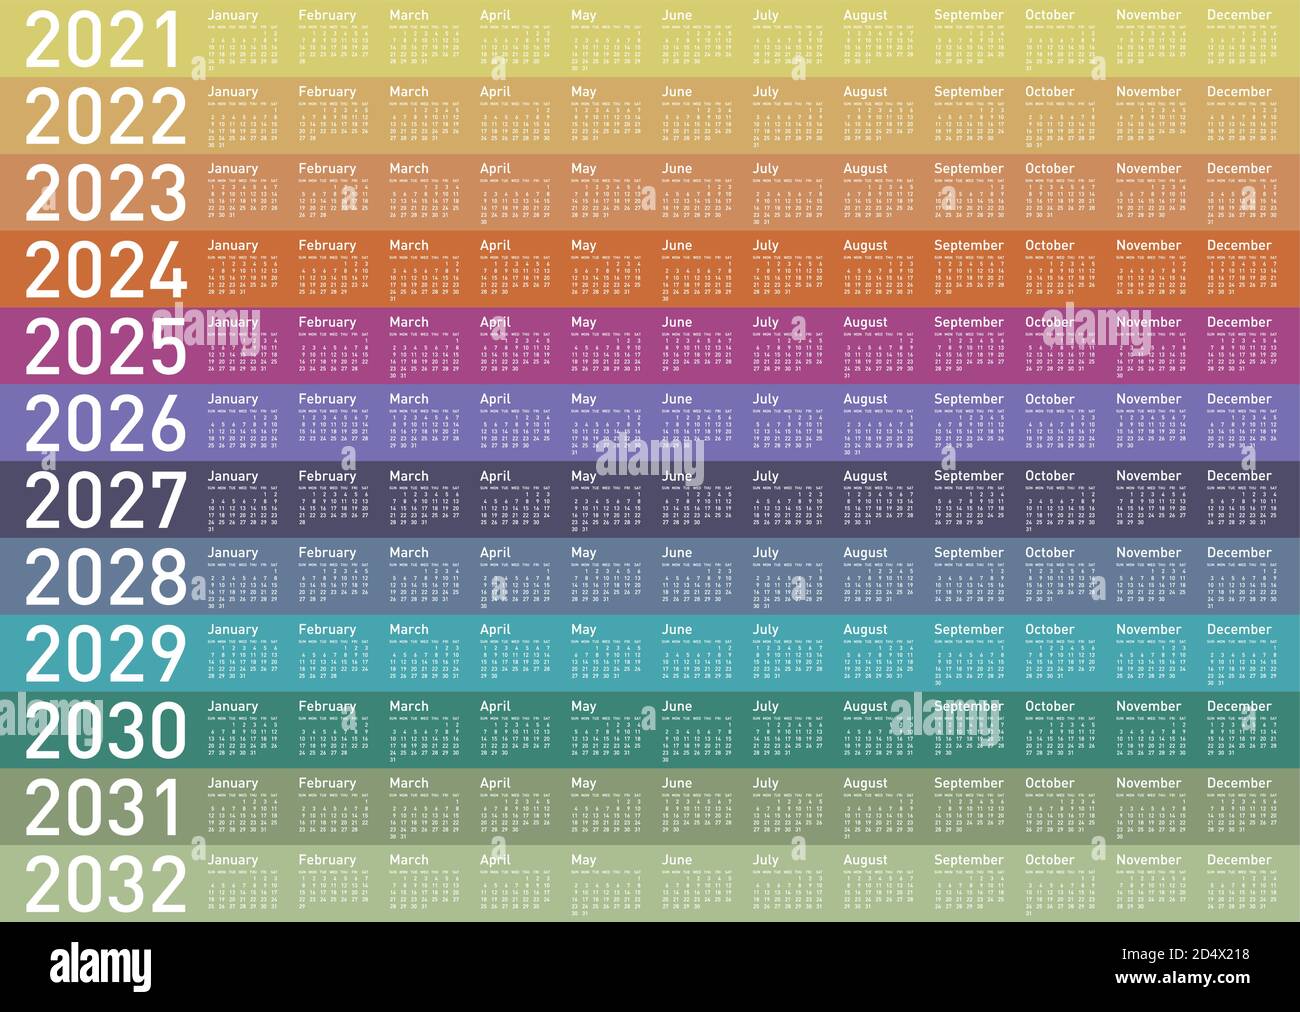 Colorful Calendar for Years 2021, 2022, 2023, 2024, 2025, 2026, 2027 ...